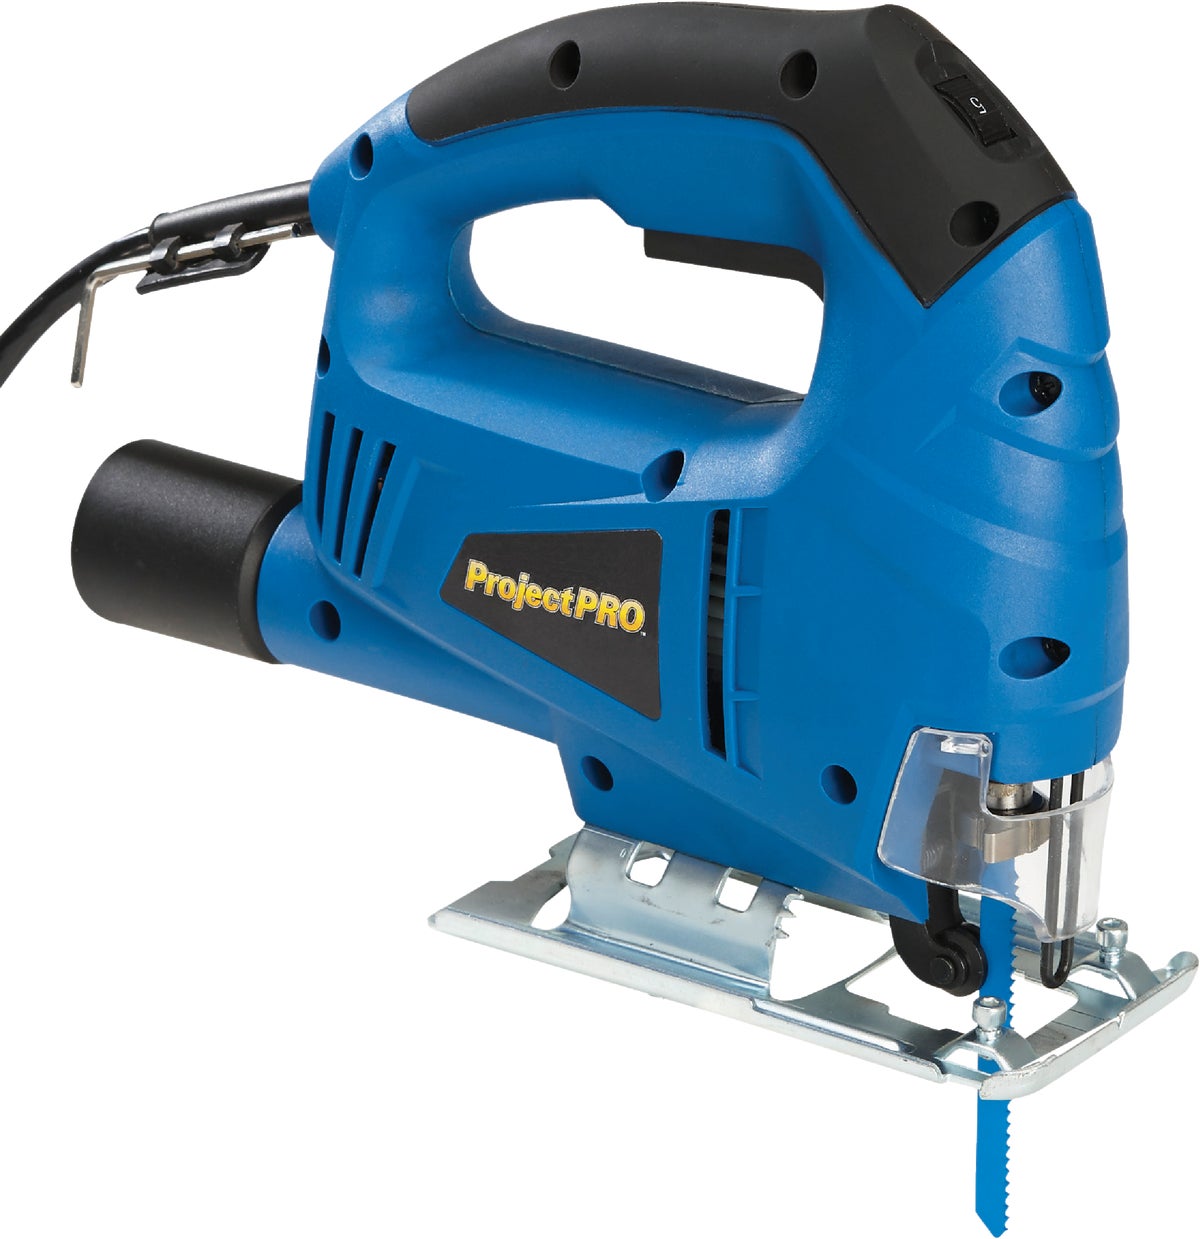 Buy Project Pro 4.5A Jig Saw 4.5